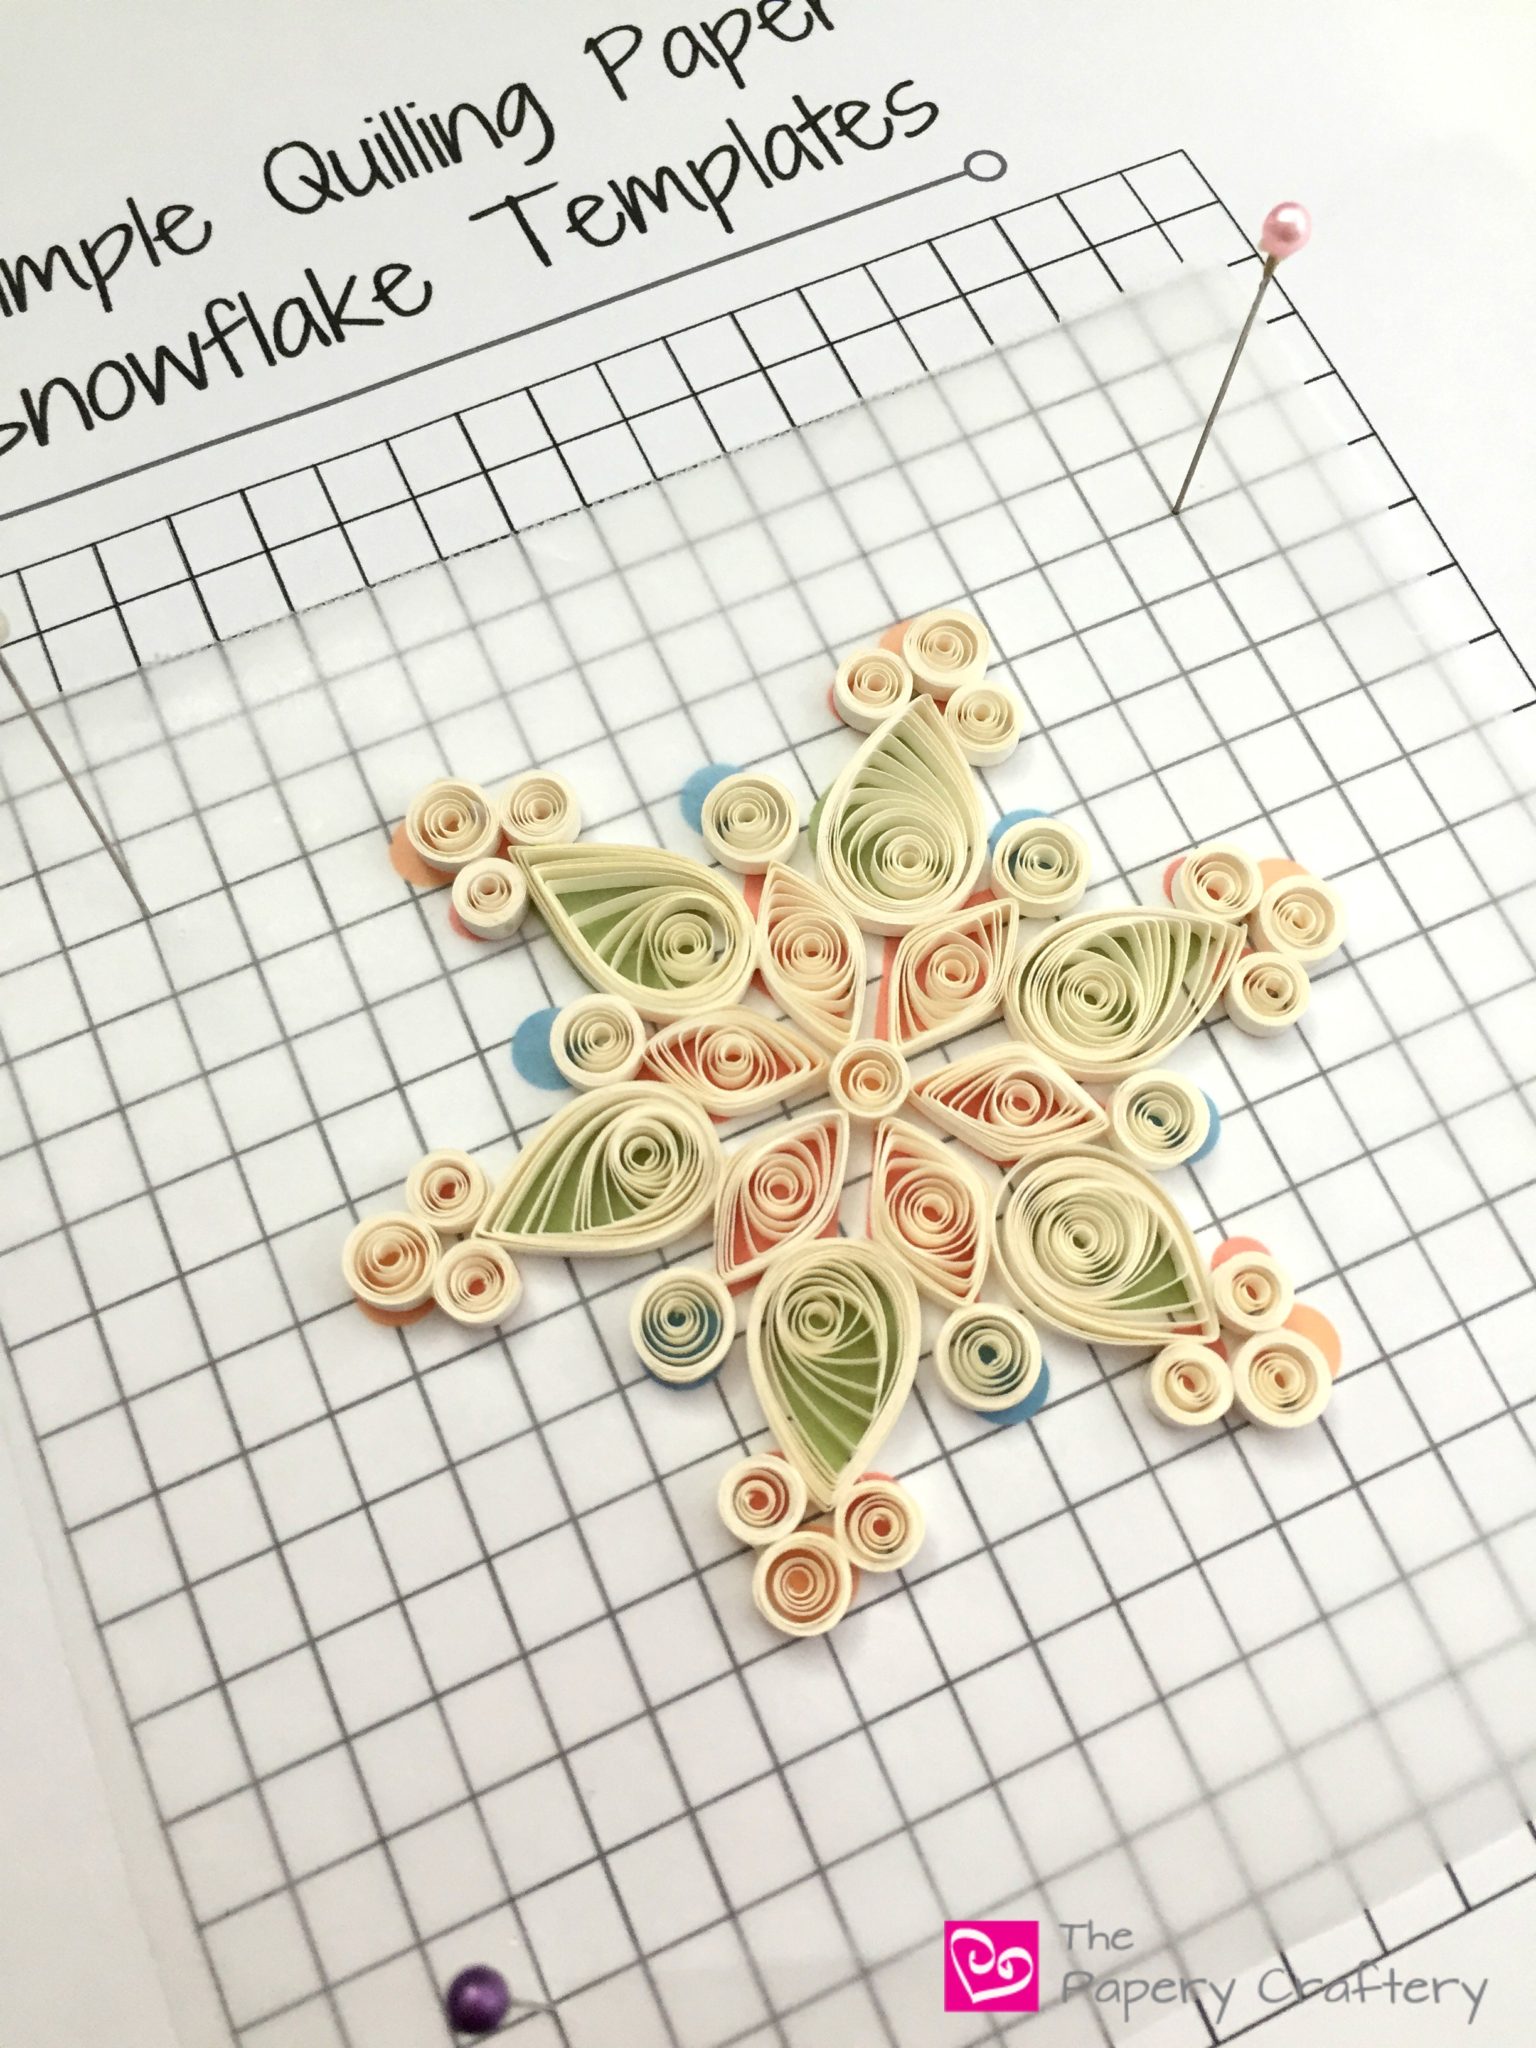 How to Make Quilling Paper Snowflakes - The Papery Craftery